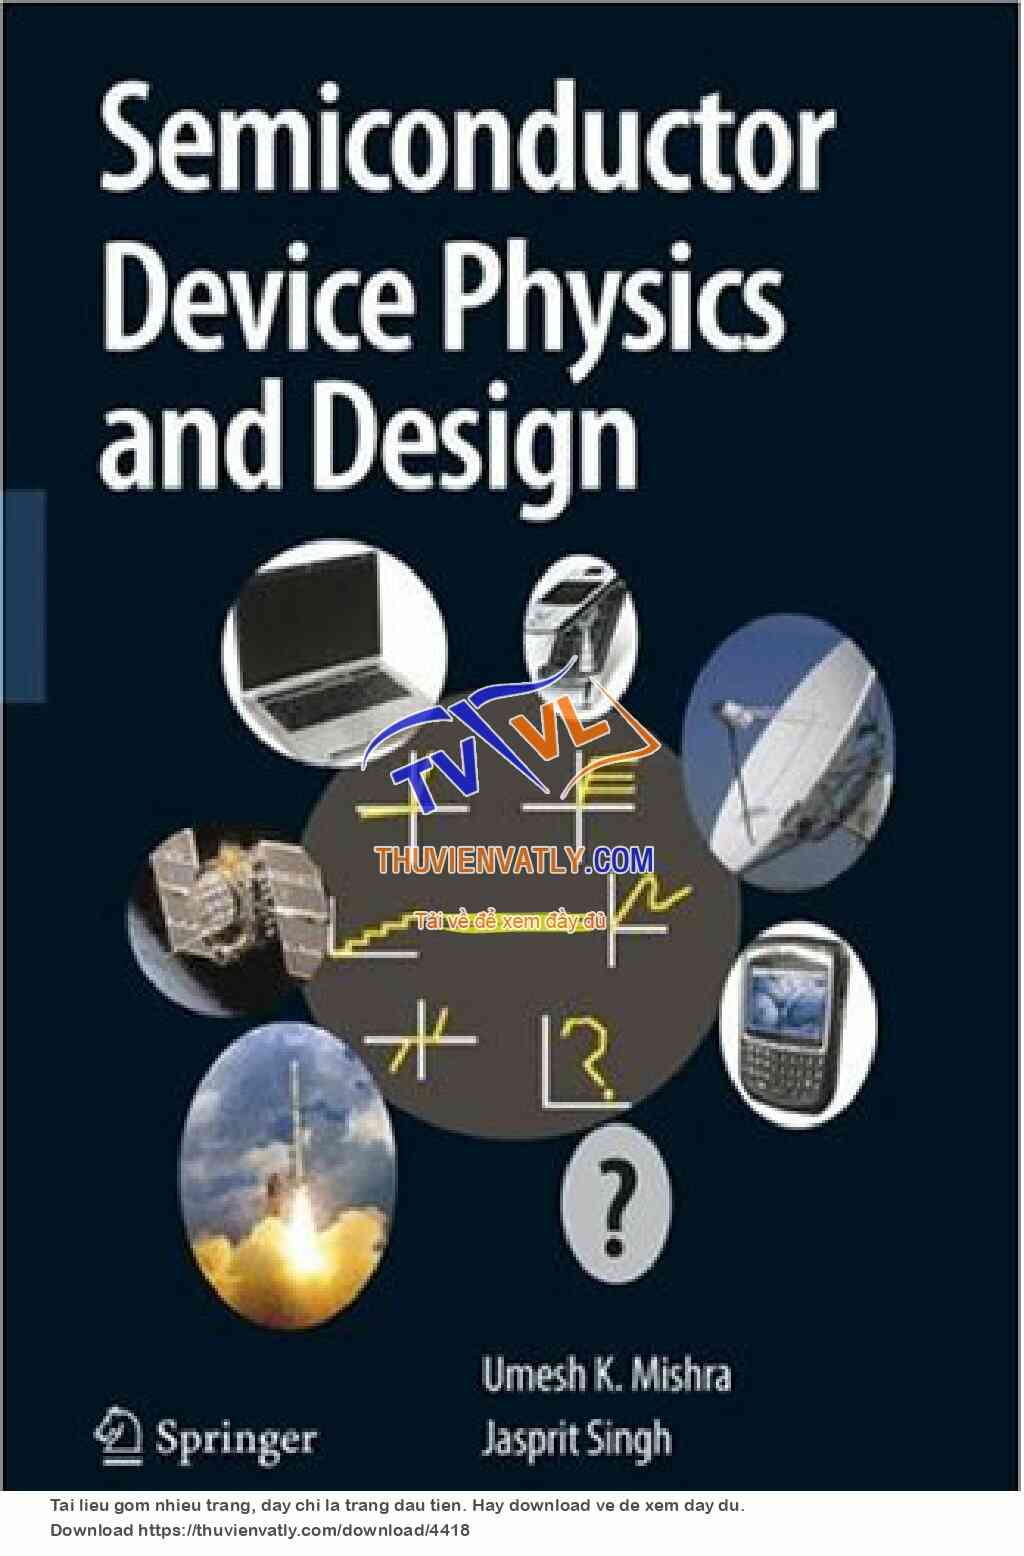 Semiconductor Device Physics and Design